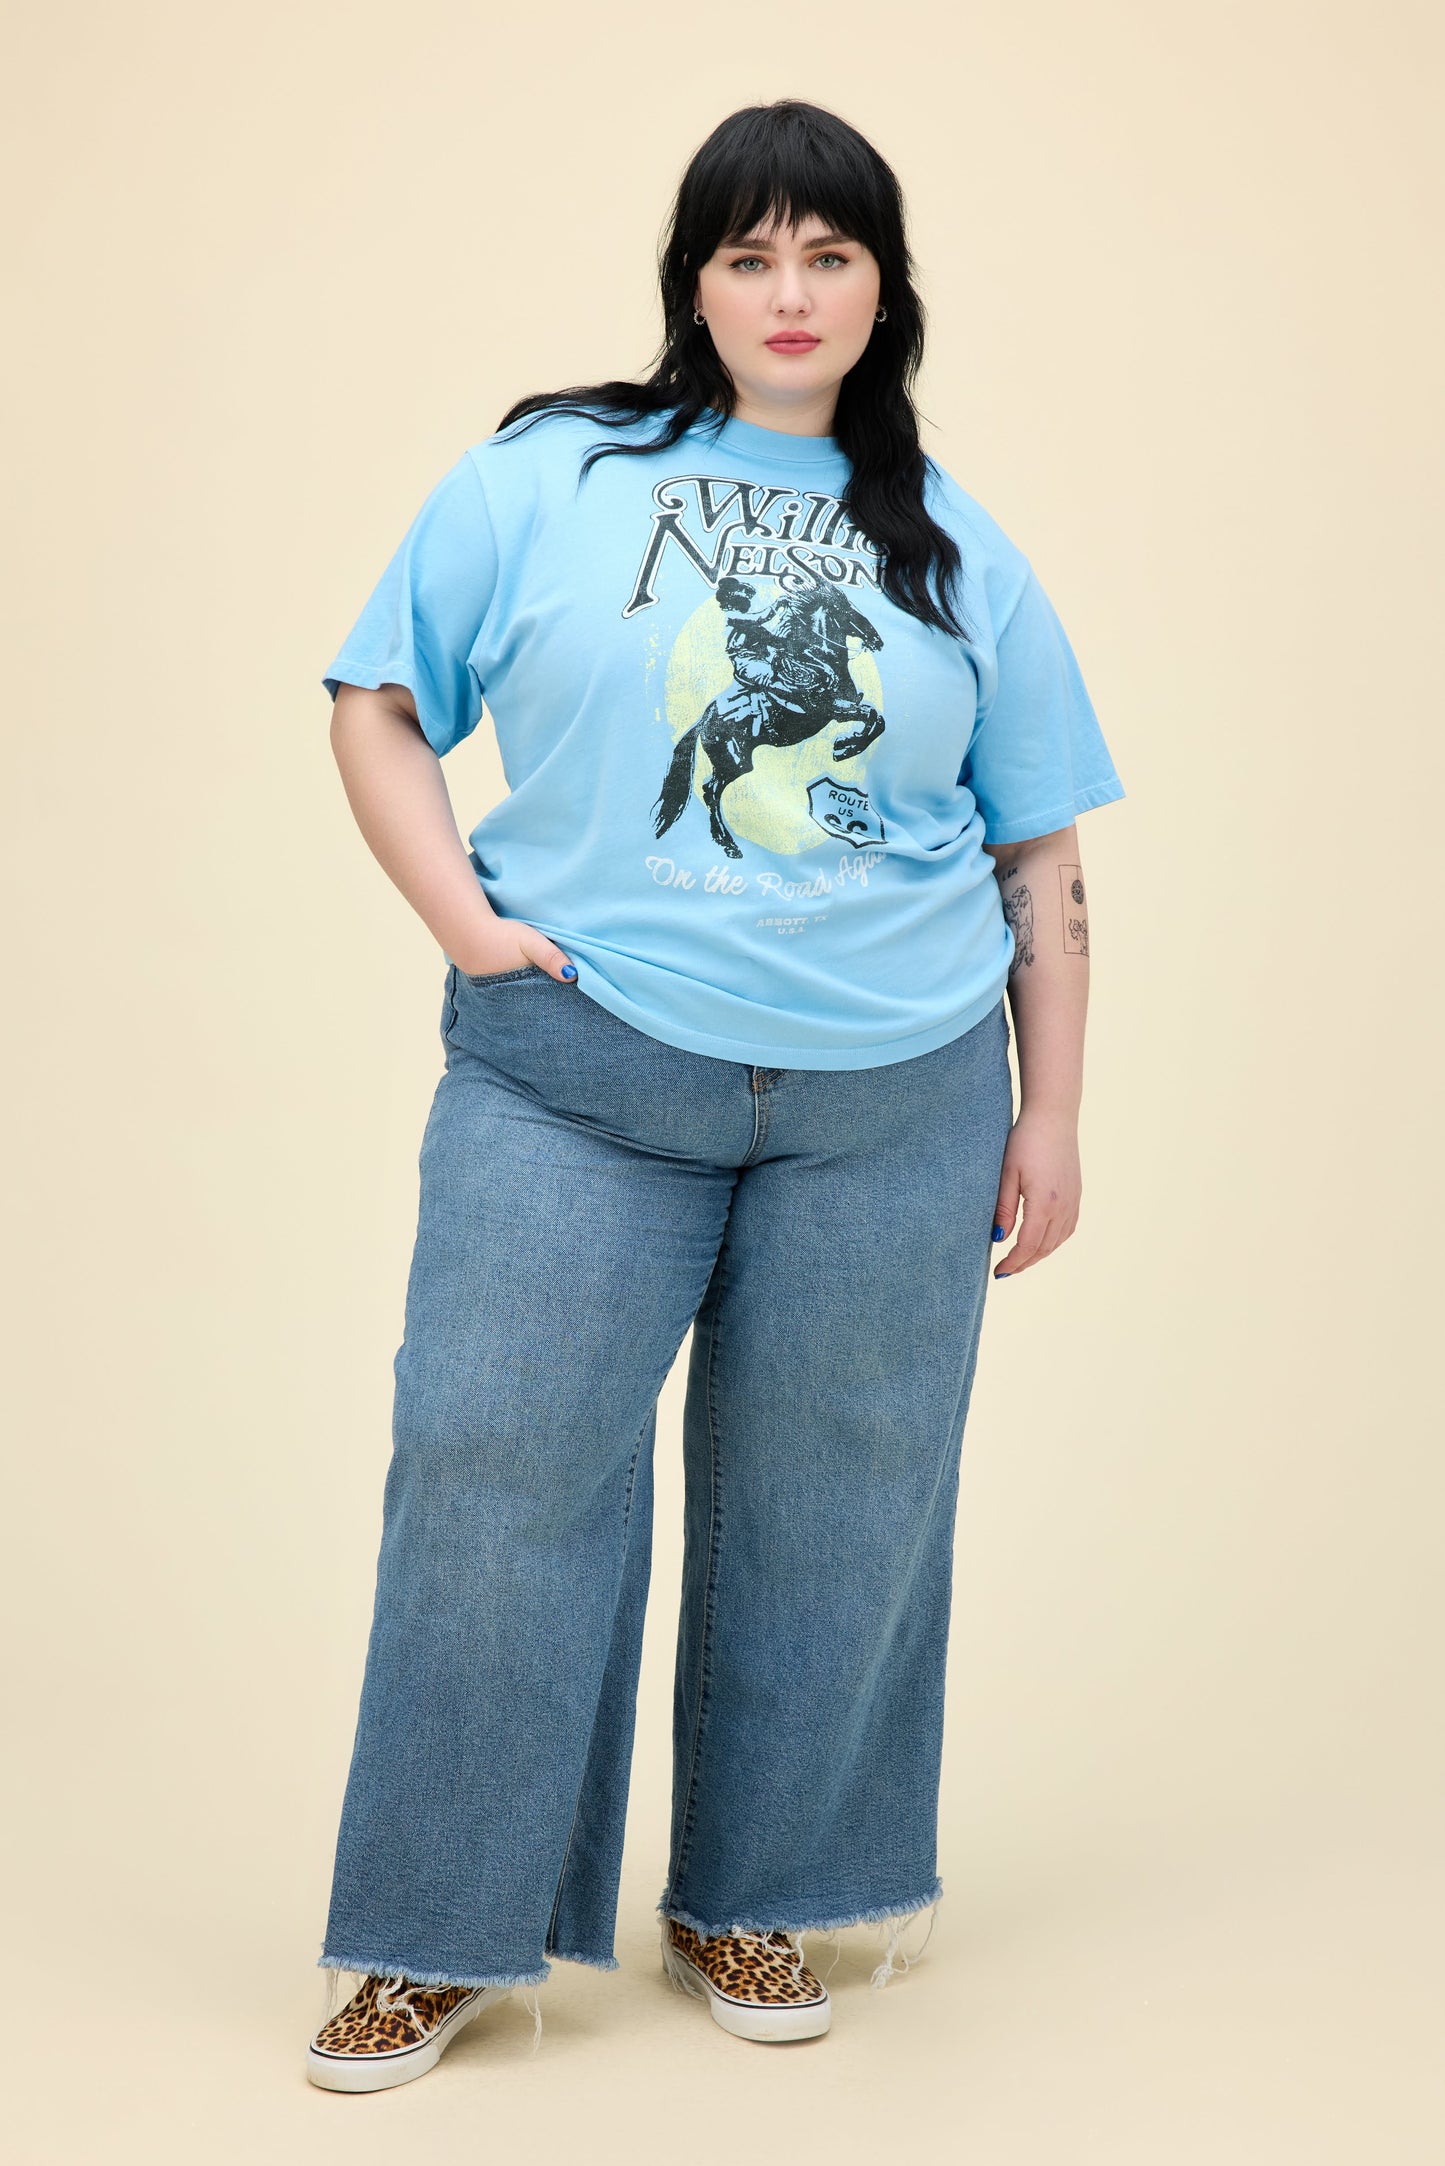 A model featuring a blue plus size weekend tee stamped with Willie Nelson and his route 66 album cover.